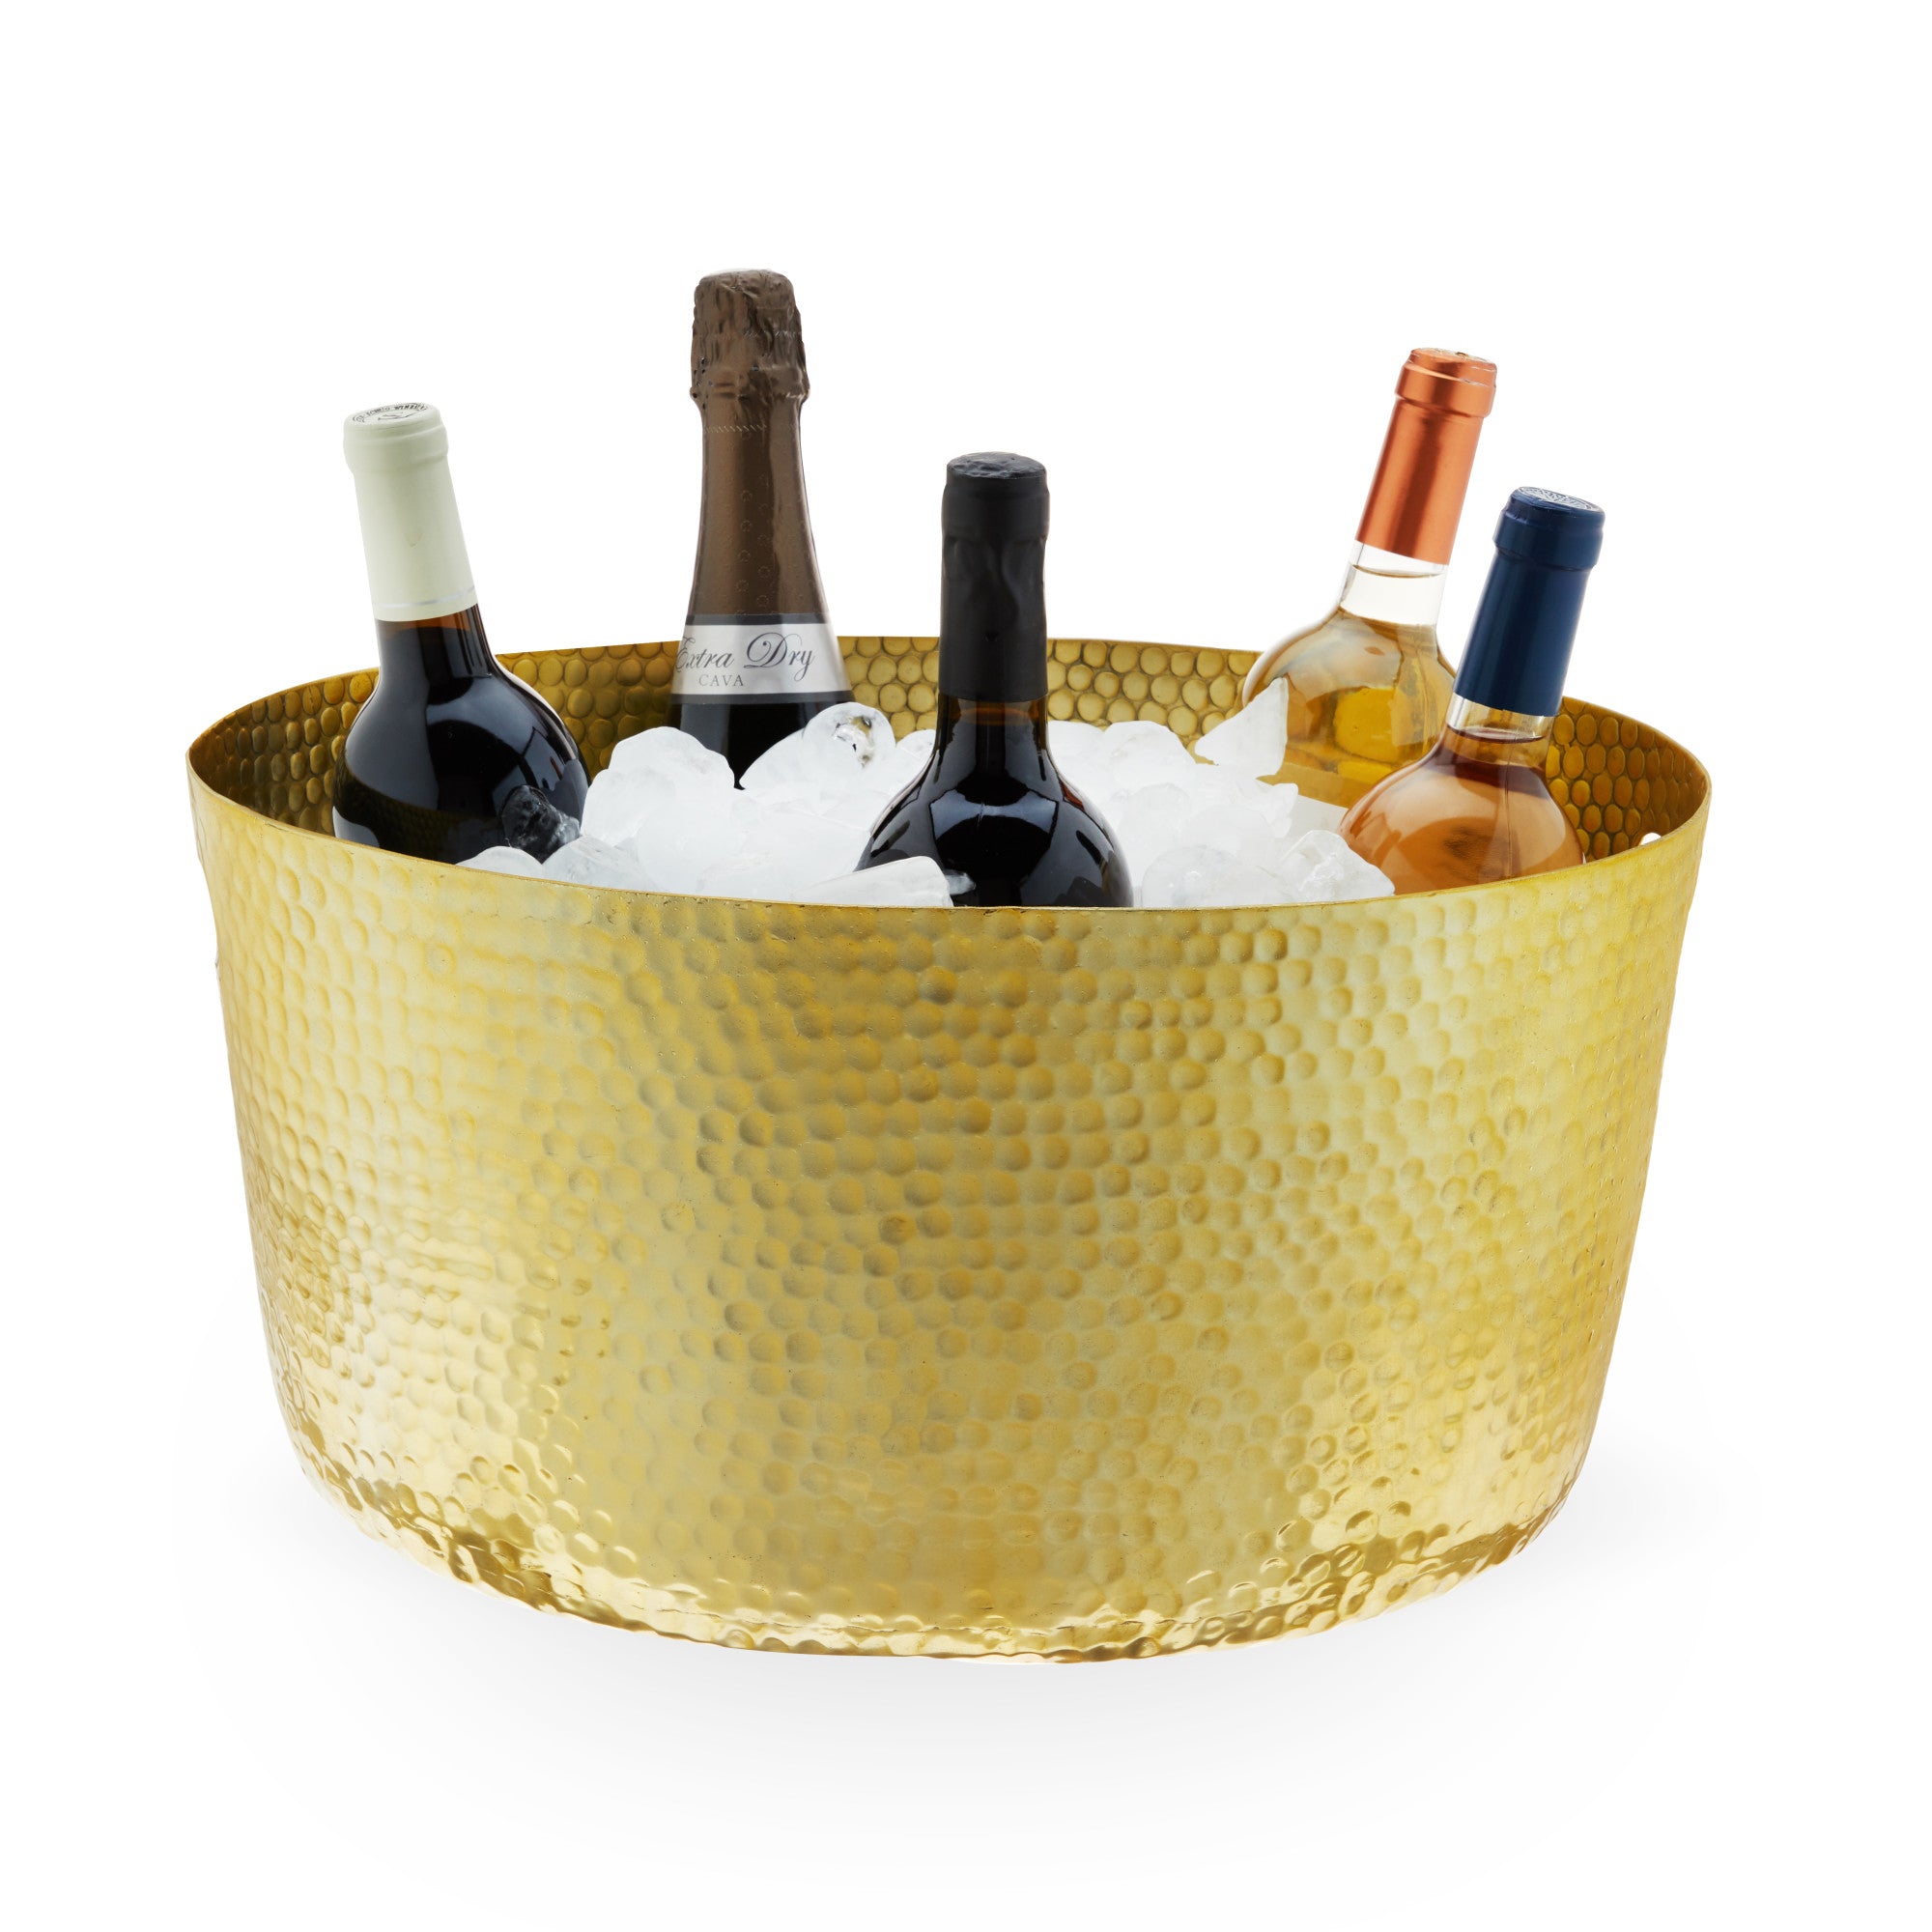 Gold Hammered Tub by Twine (10616)